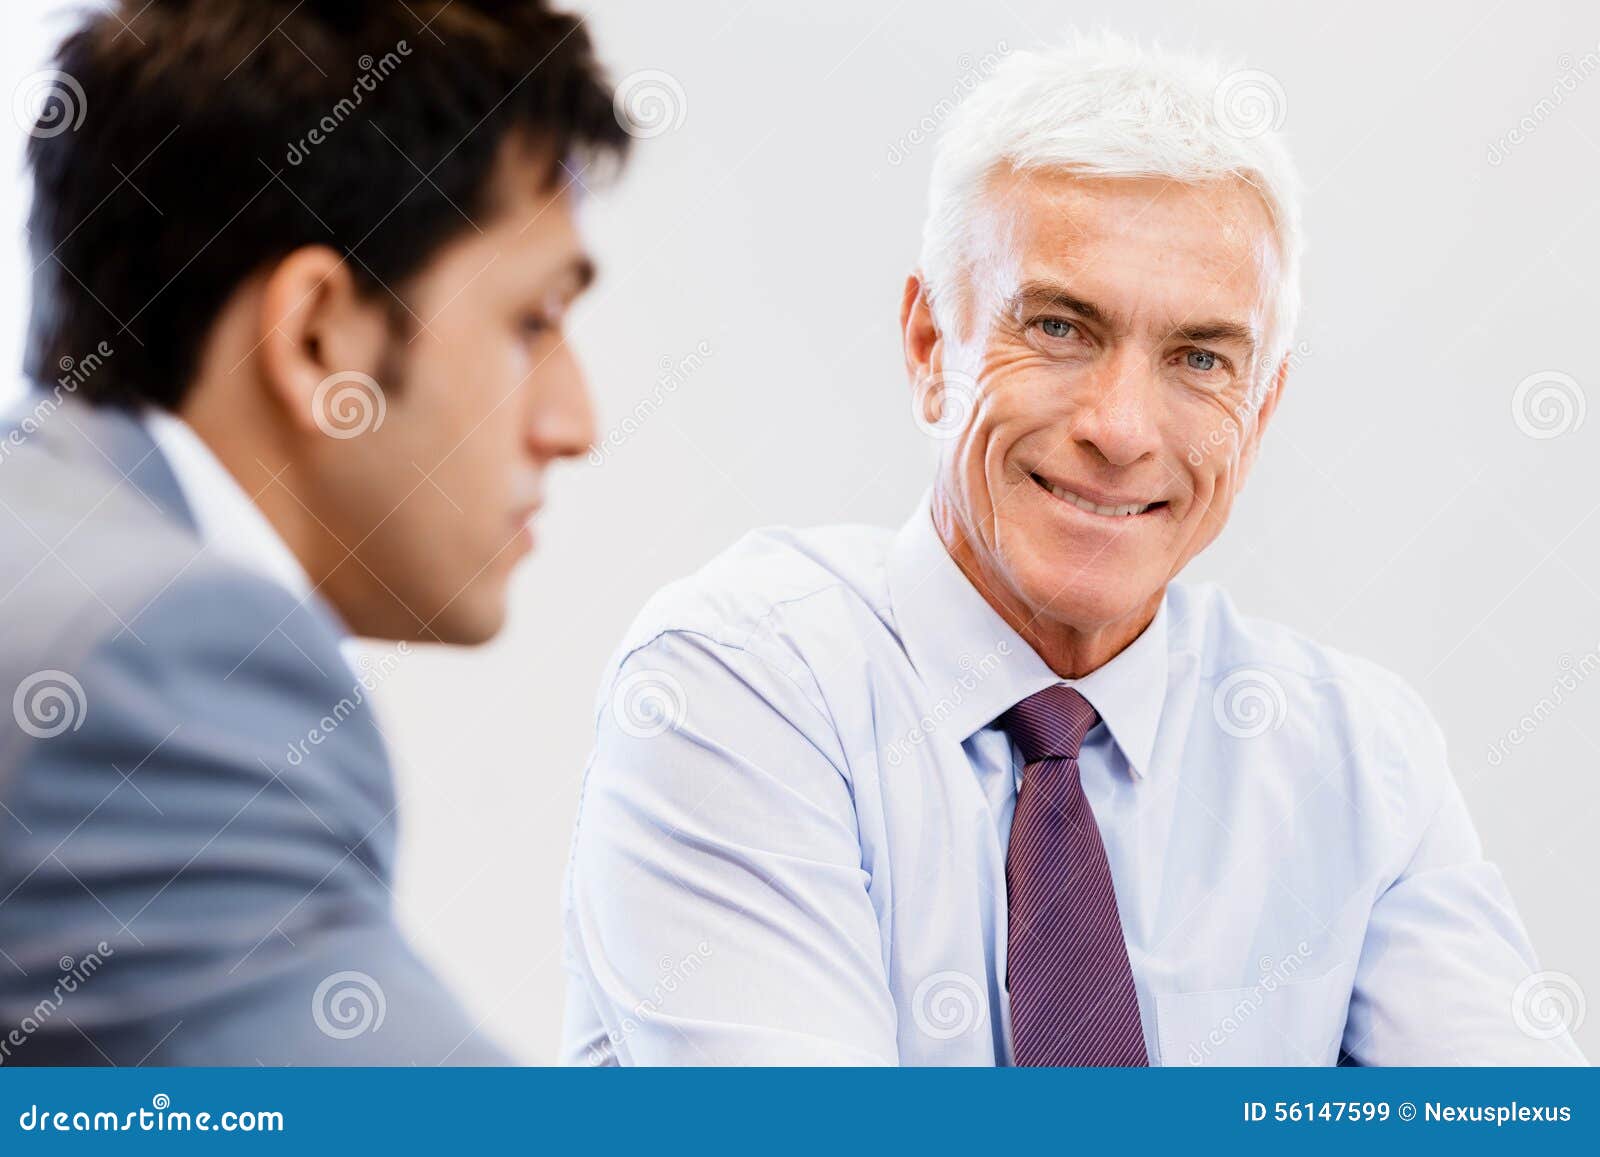 Success and Professionalism in Person Stock Image - Image of ...